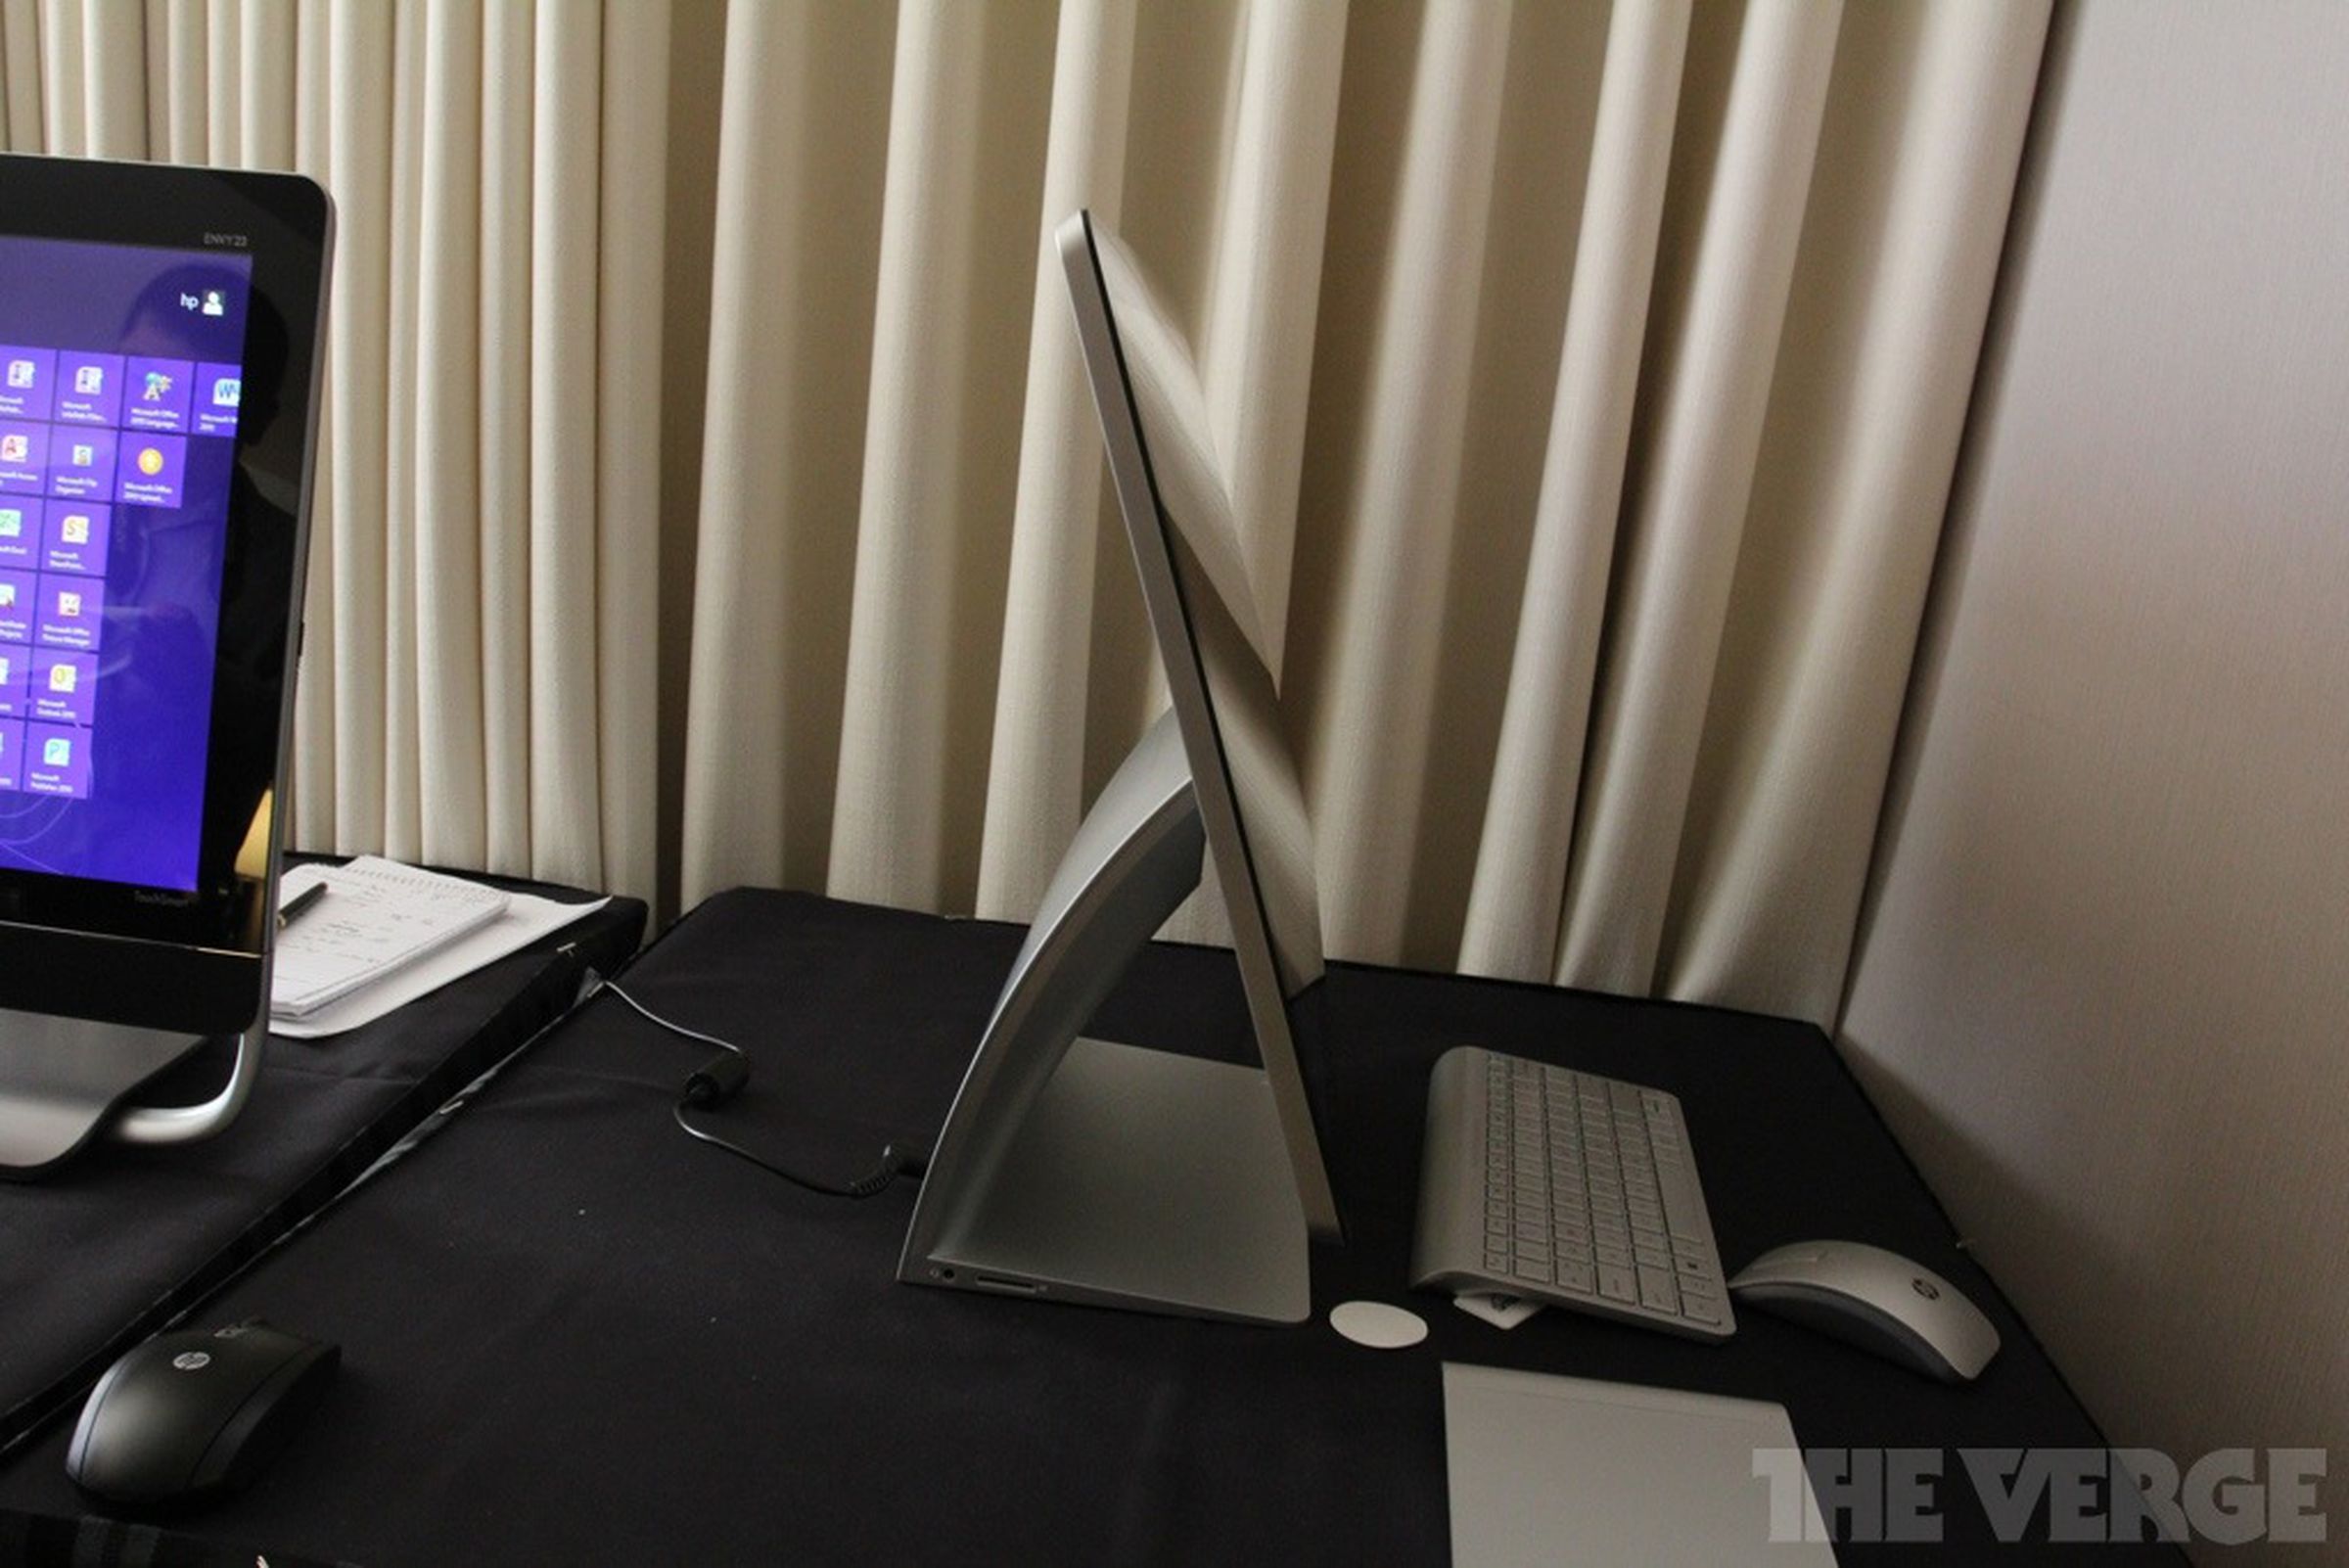 HP Spectre One all-in-one desktop hands-on photos